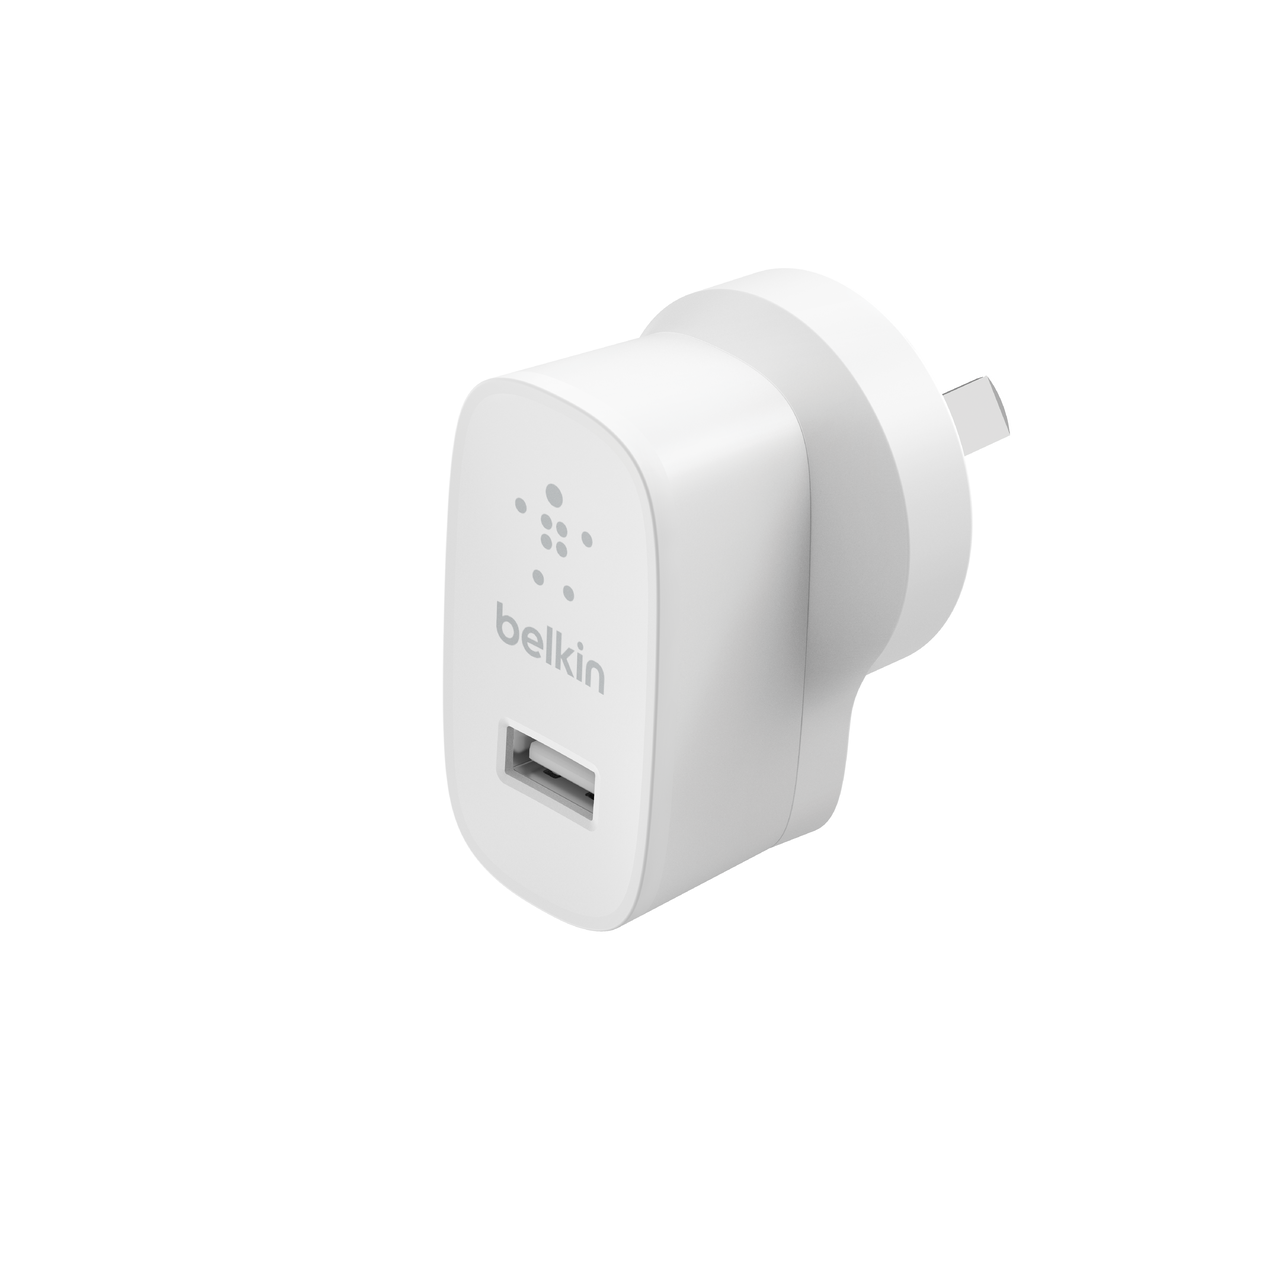 iPad Charger iPhone Charger [MFi Certified] 12W USB Wall Charger Foldable  Portable Travel Plug with USB Charging Modem Cables Compatible with iPhone